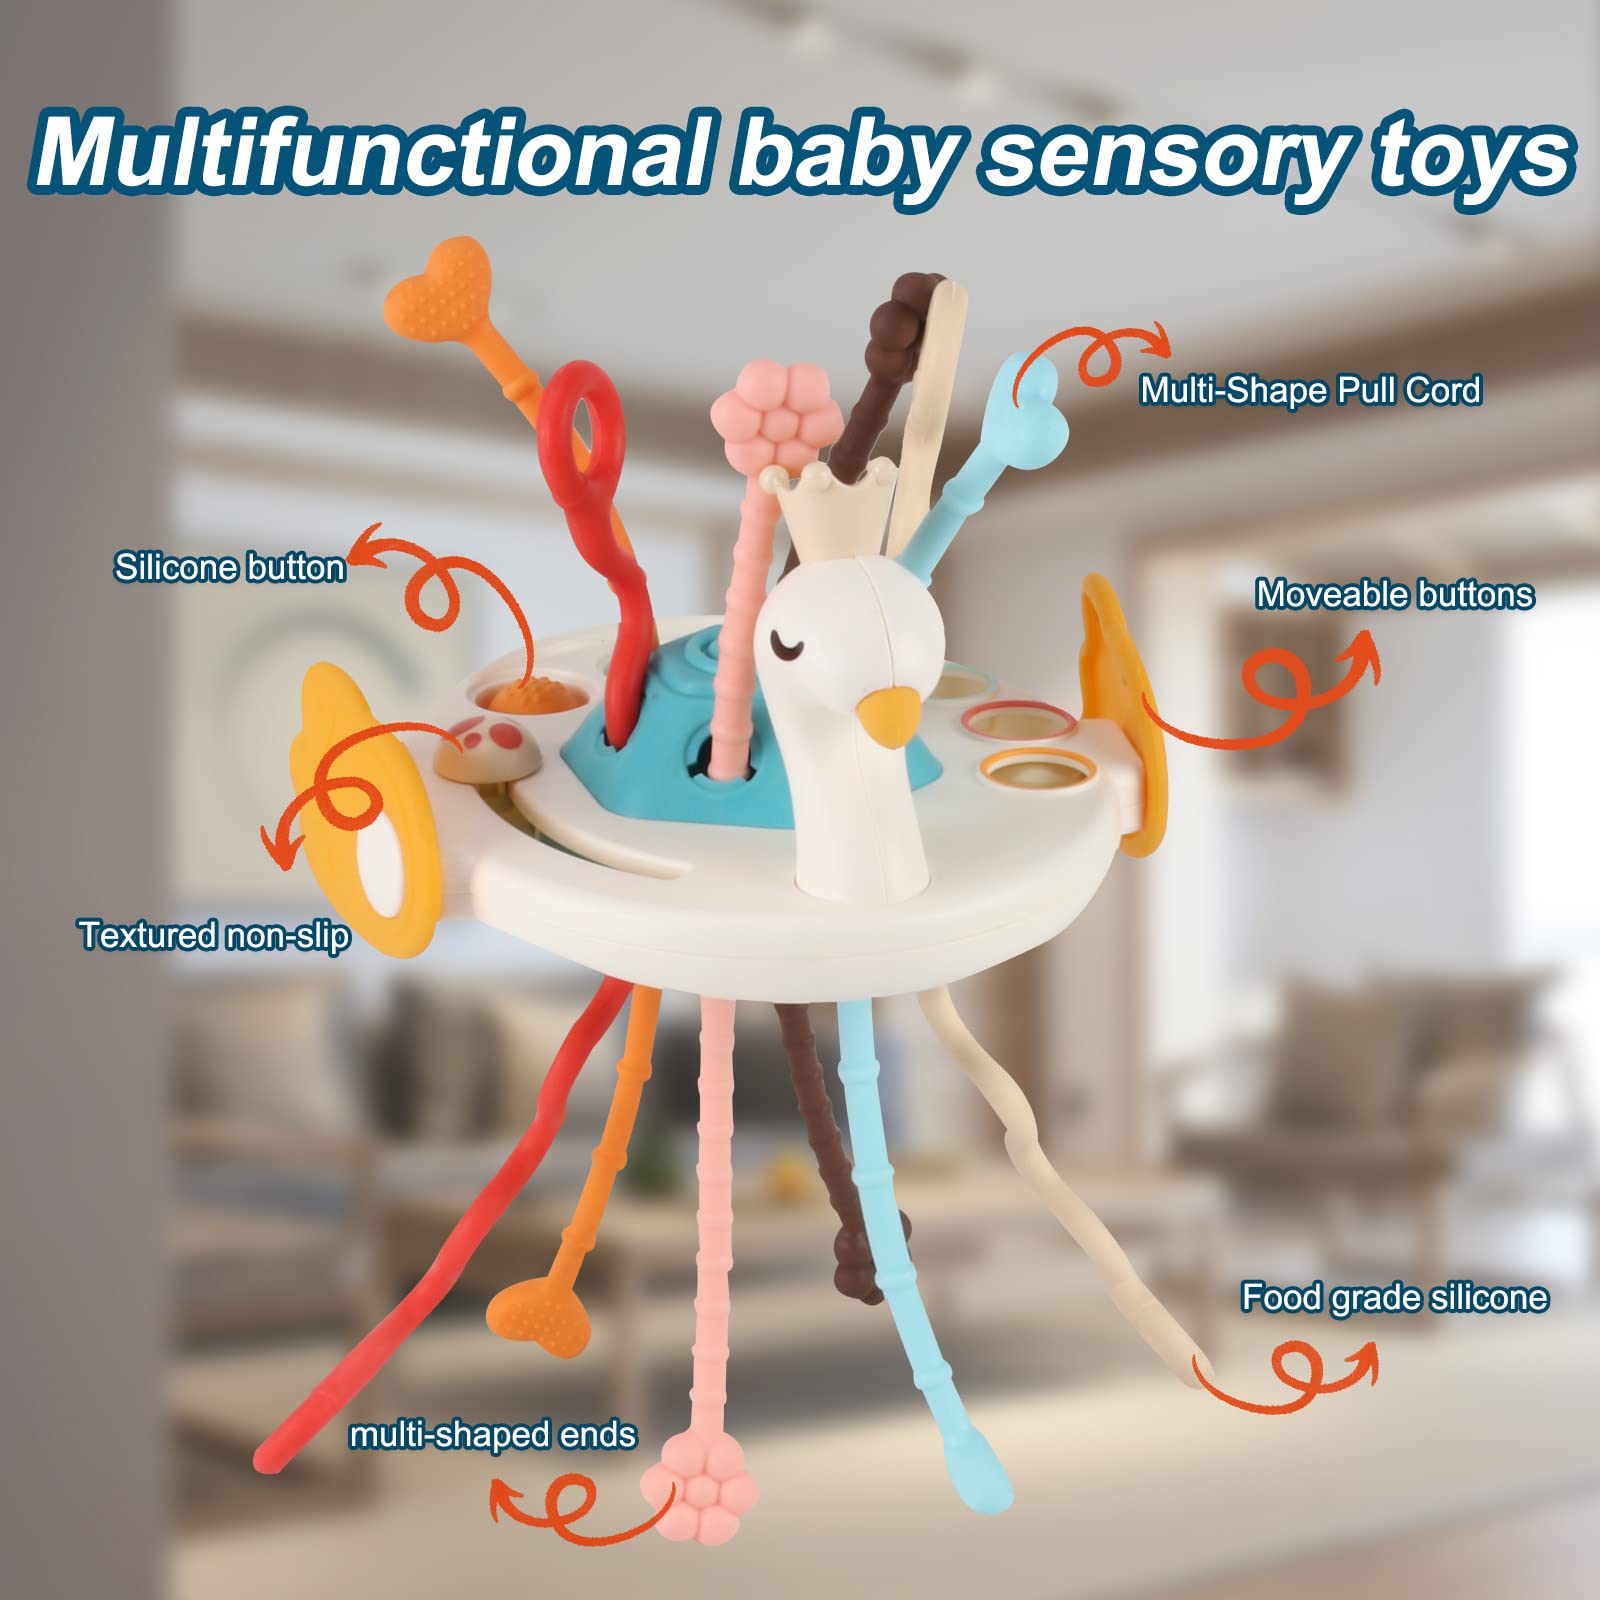 LZZAPJ Sensory Toys for Toddlers 1-3, Montessori Toys for 1 Year Old, Infant Swan Pull String Car Seat Toys for Travel, Teething Toys for Babies 6-12 Months First Birthday Gift for Baby.